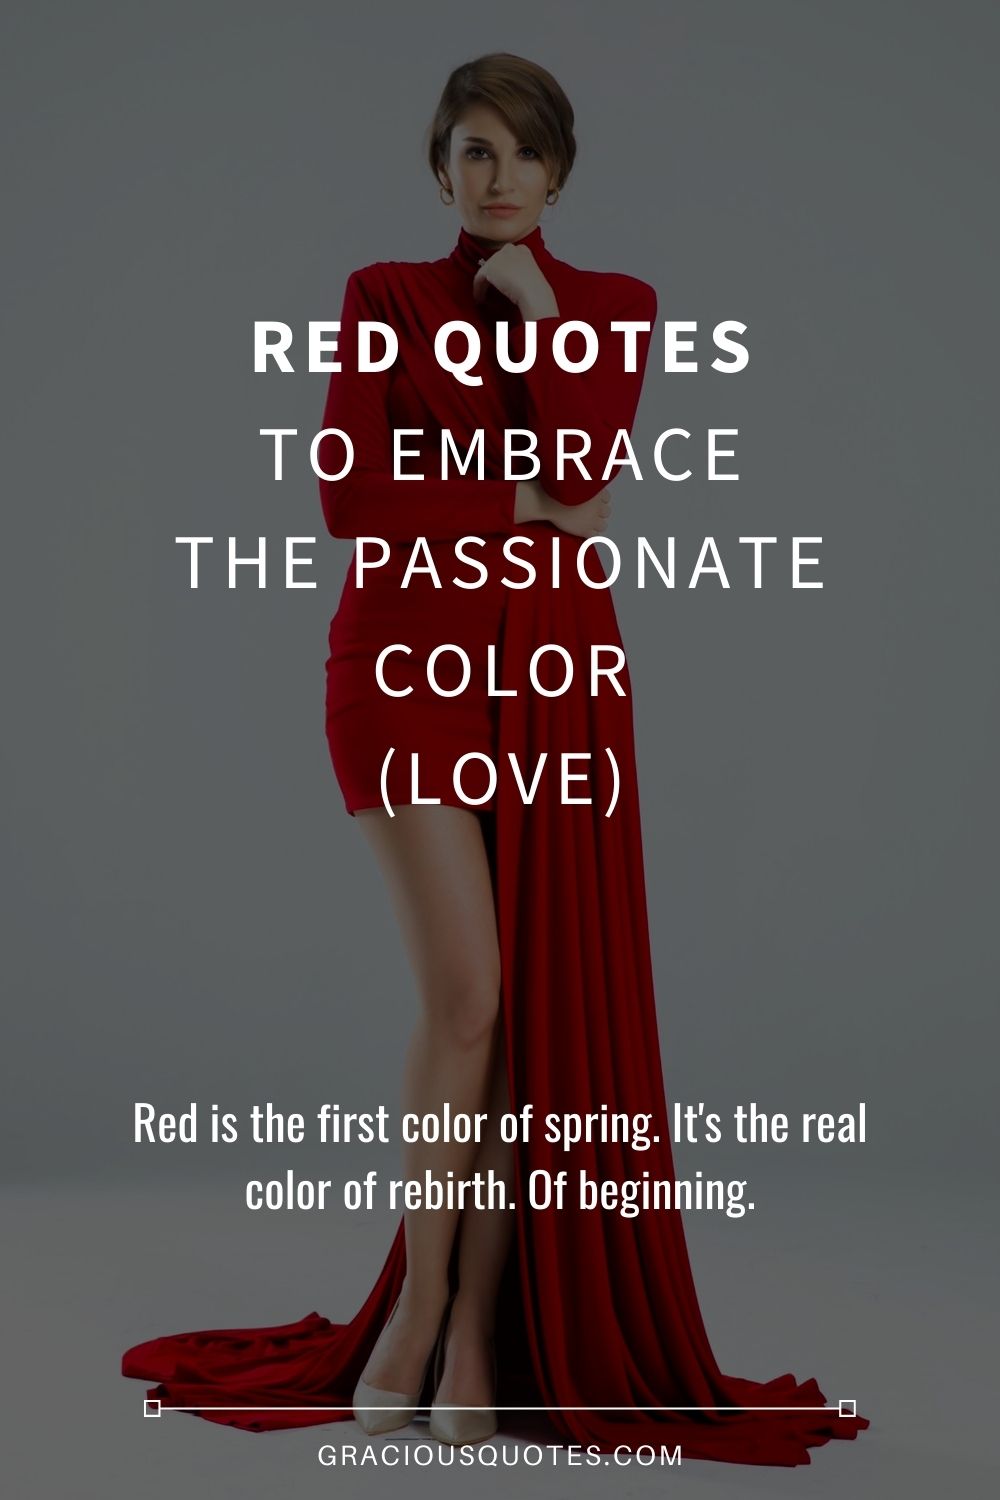 Red Quotes to Embrace the Passionate Color (LOVE) - Gracious Quotes